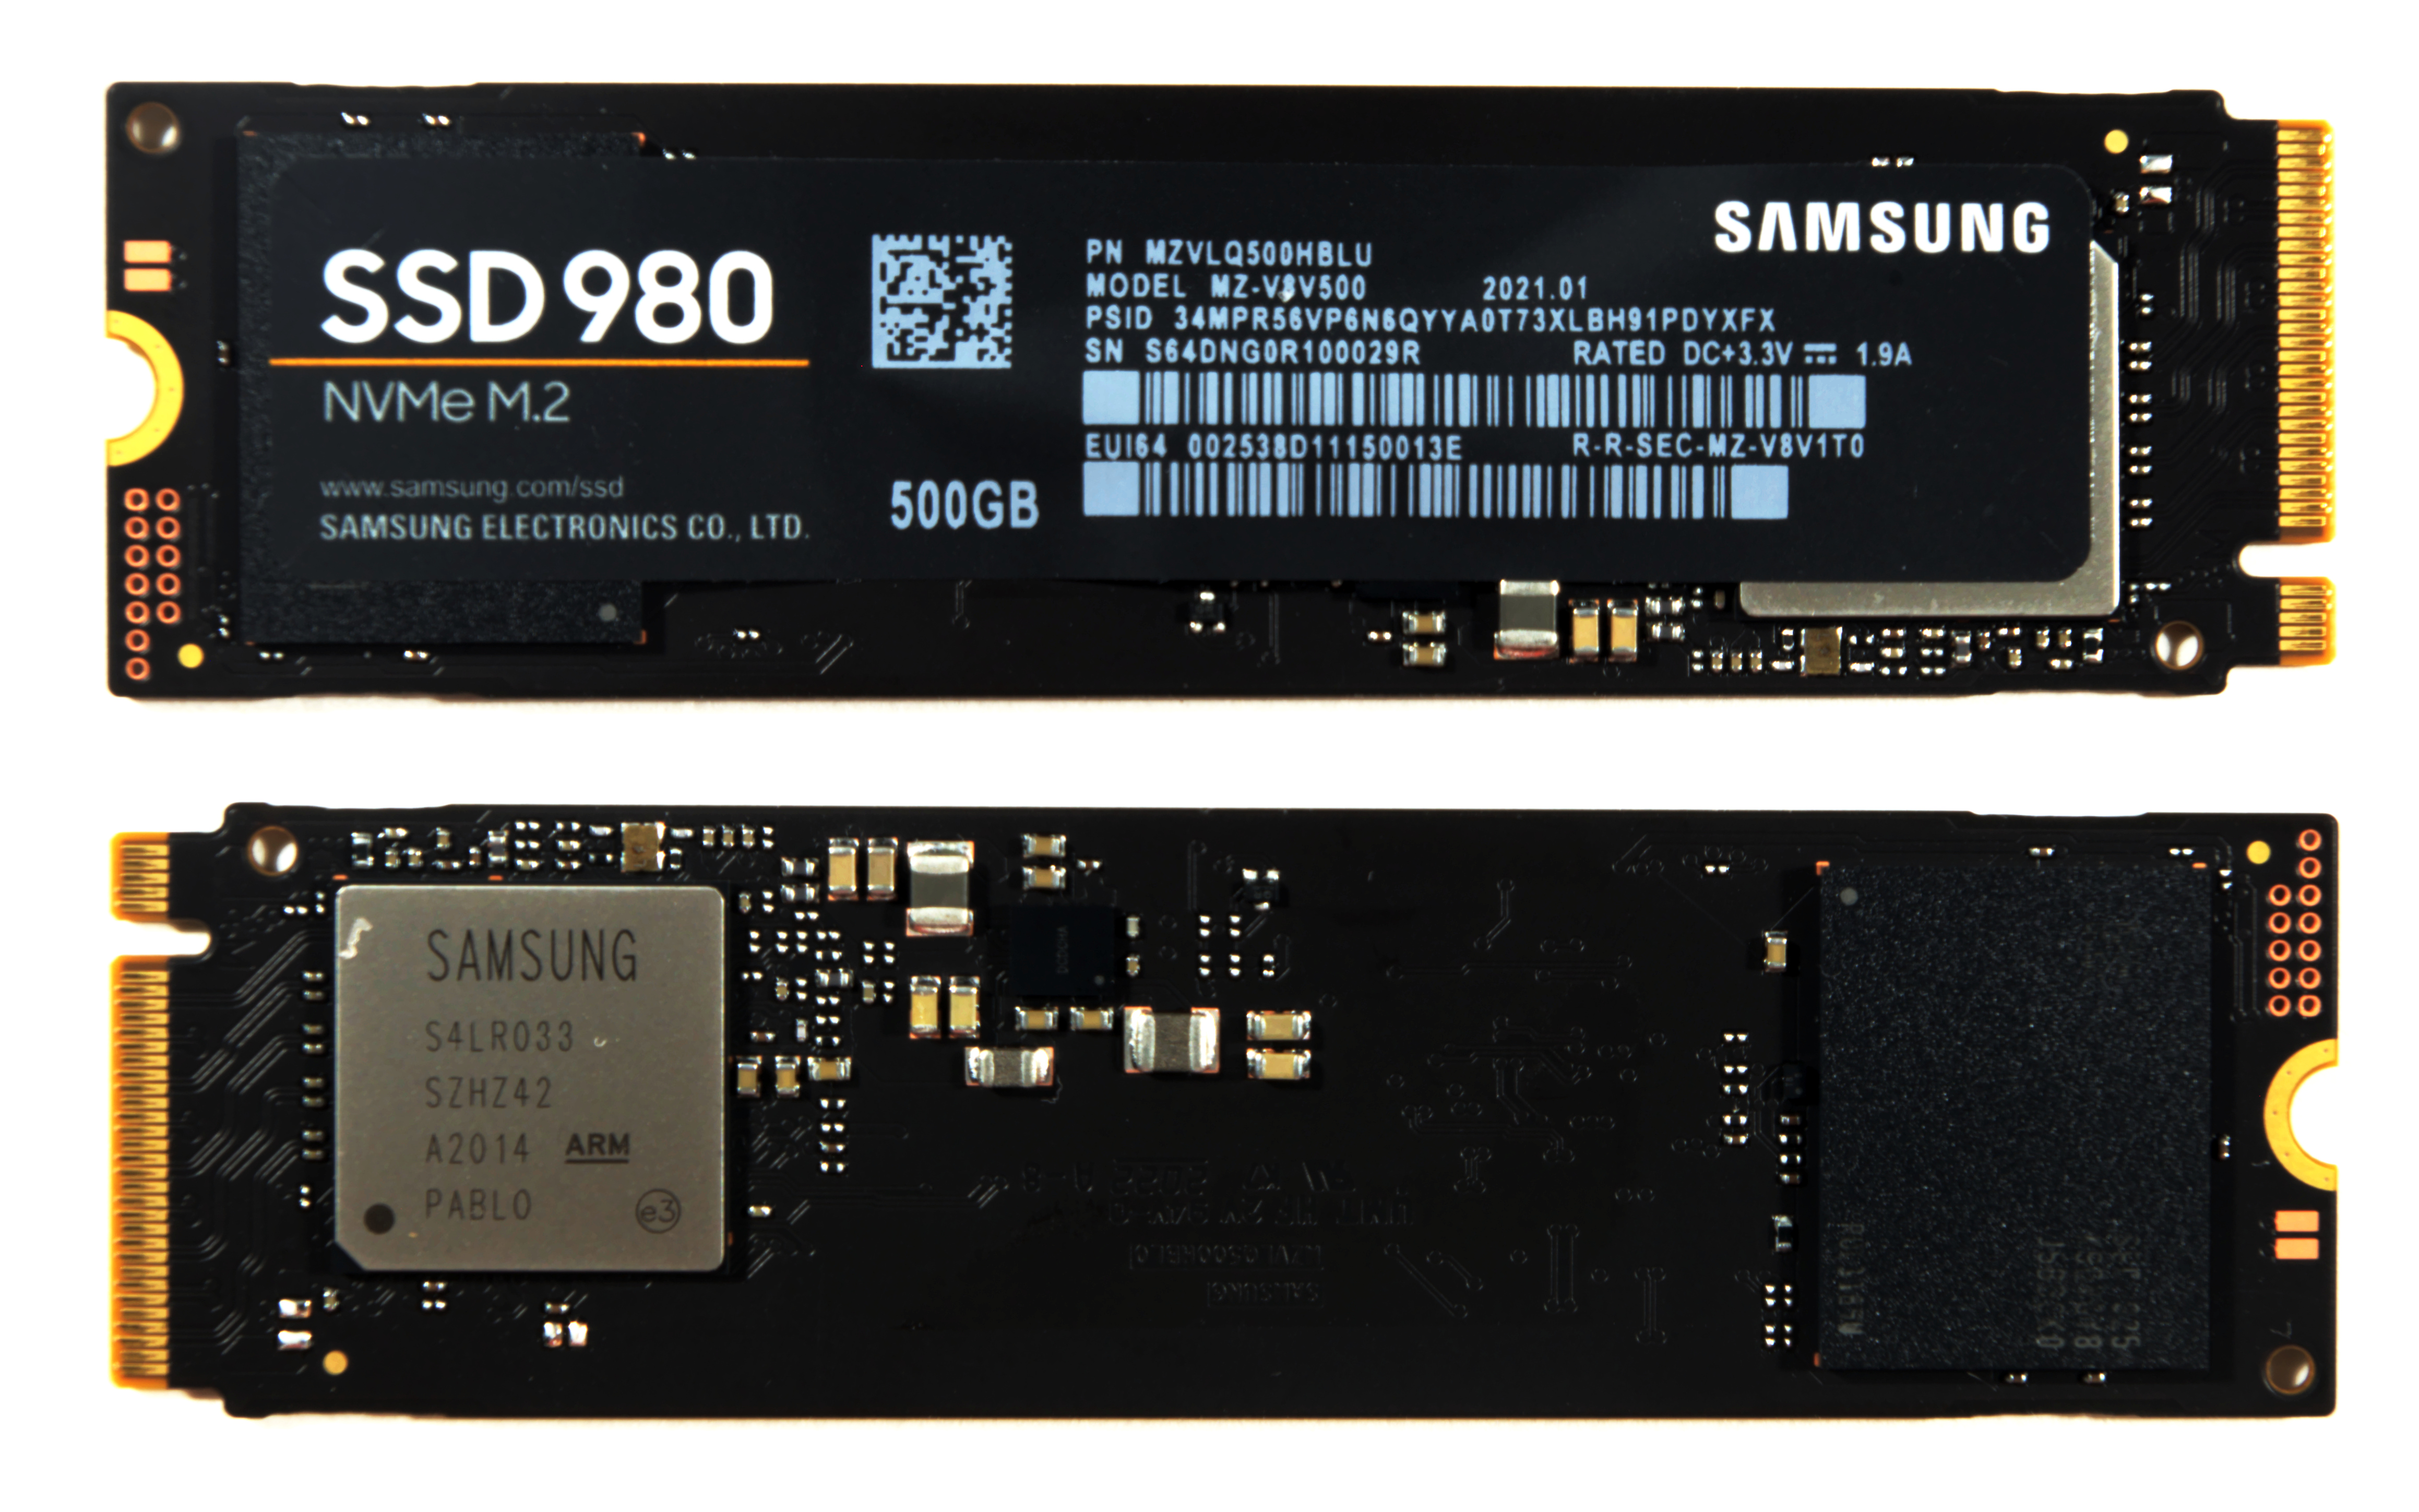 Samsung SSD 980 (500GB & 1TB) Review: Entry NVMe